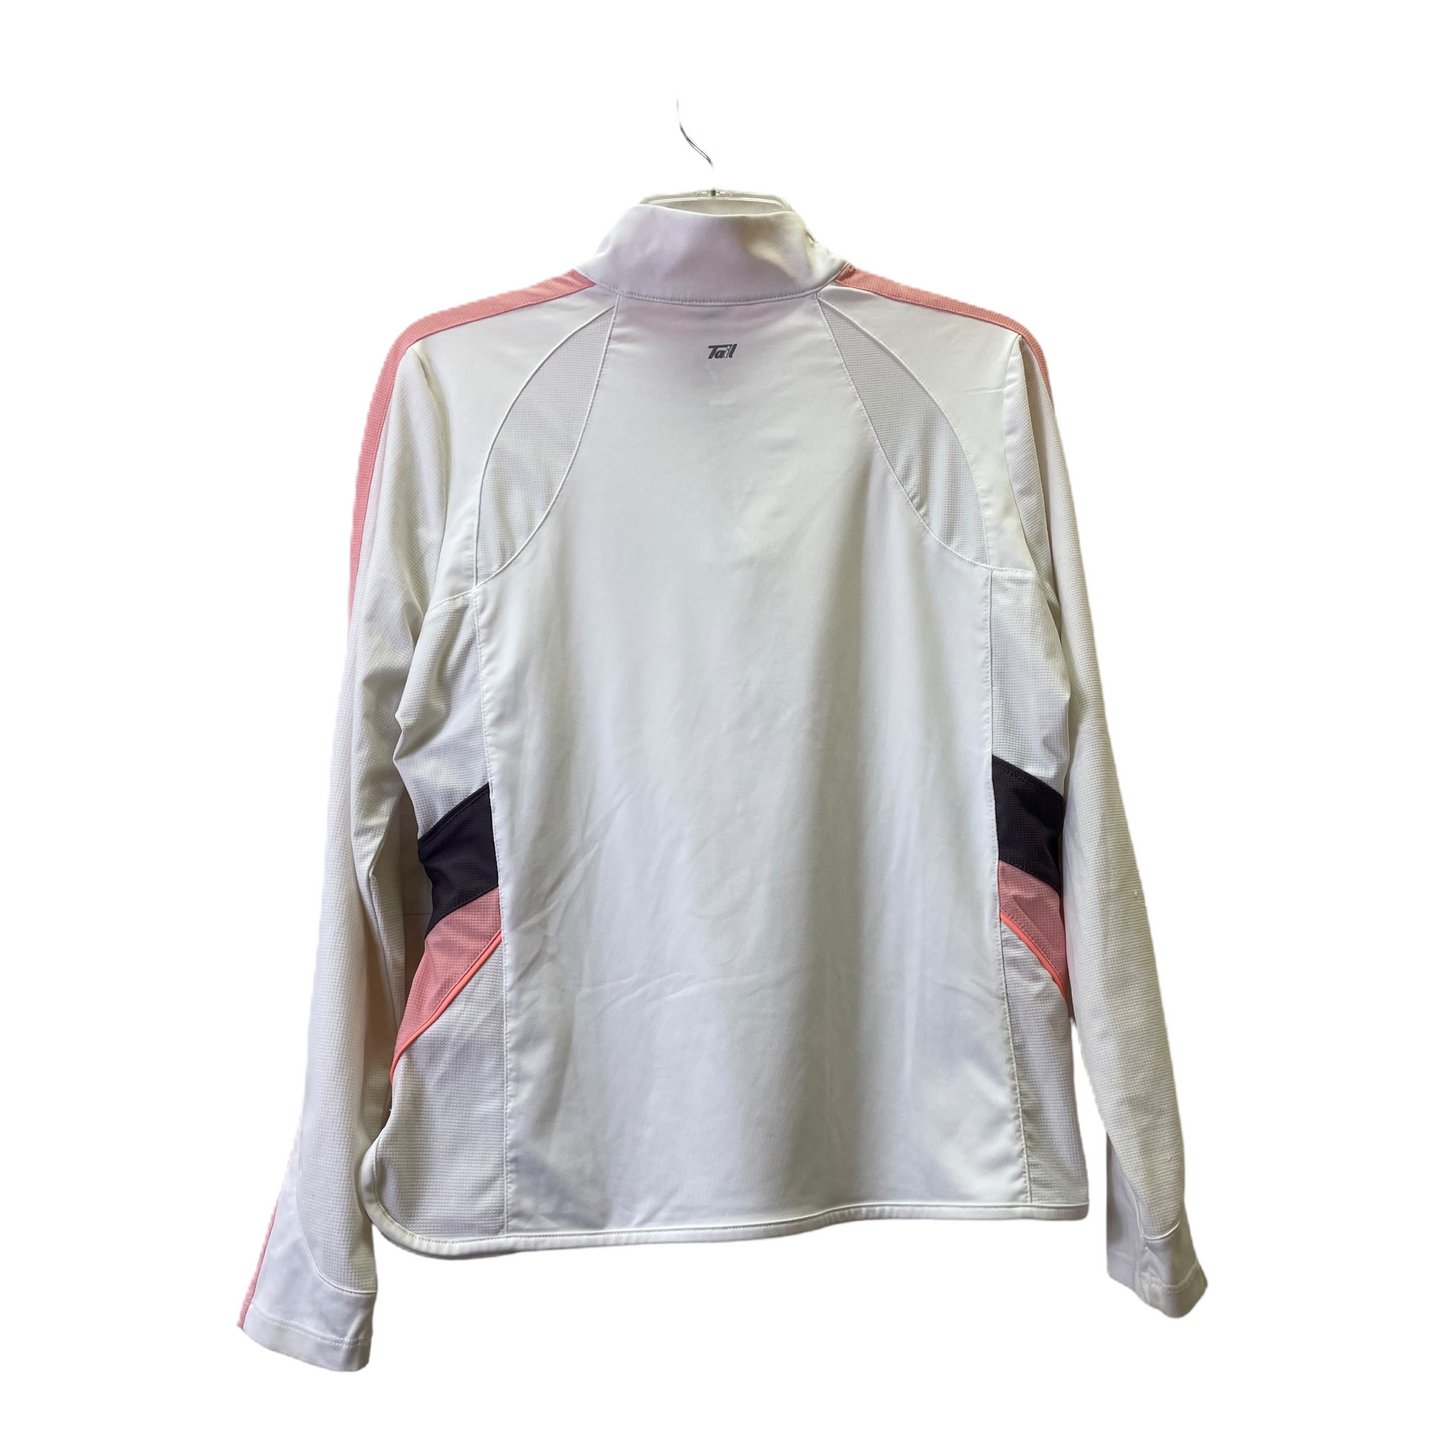 White Athletic Top Long Sleeve Collar By Tail, Size: M